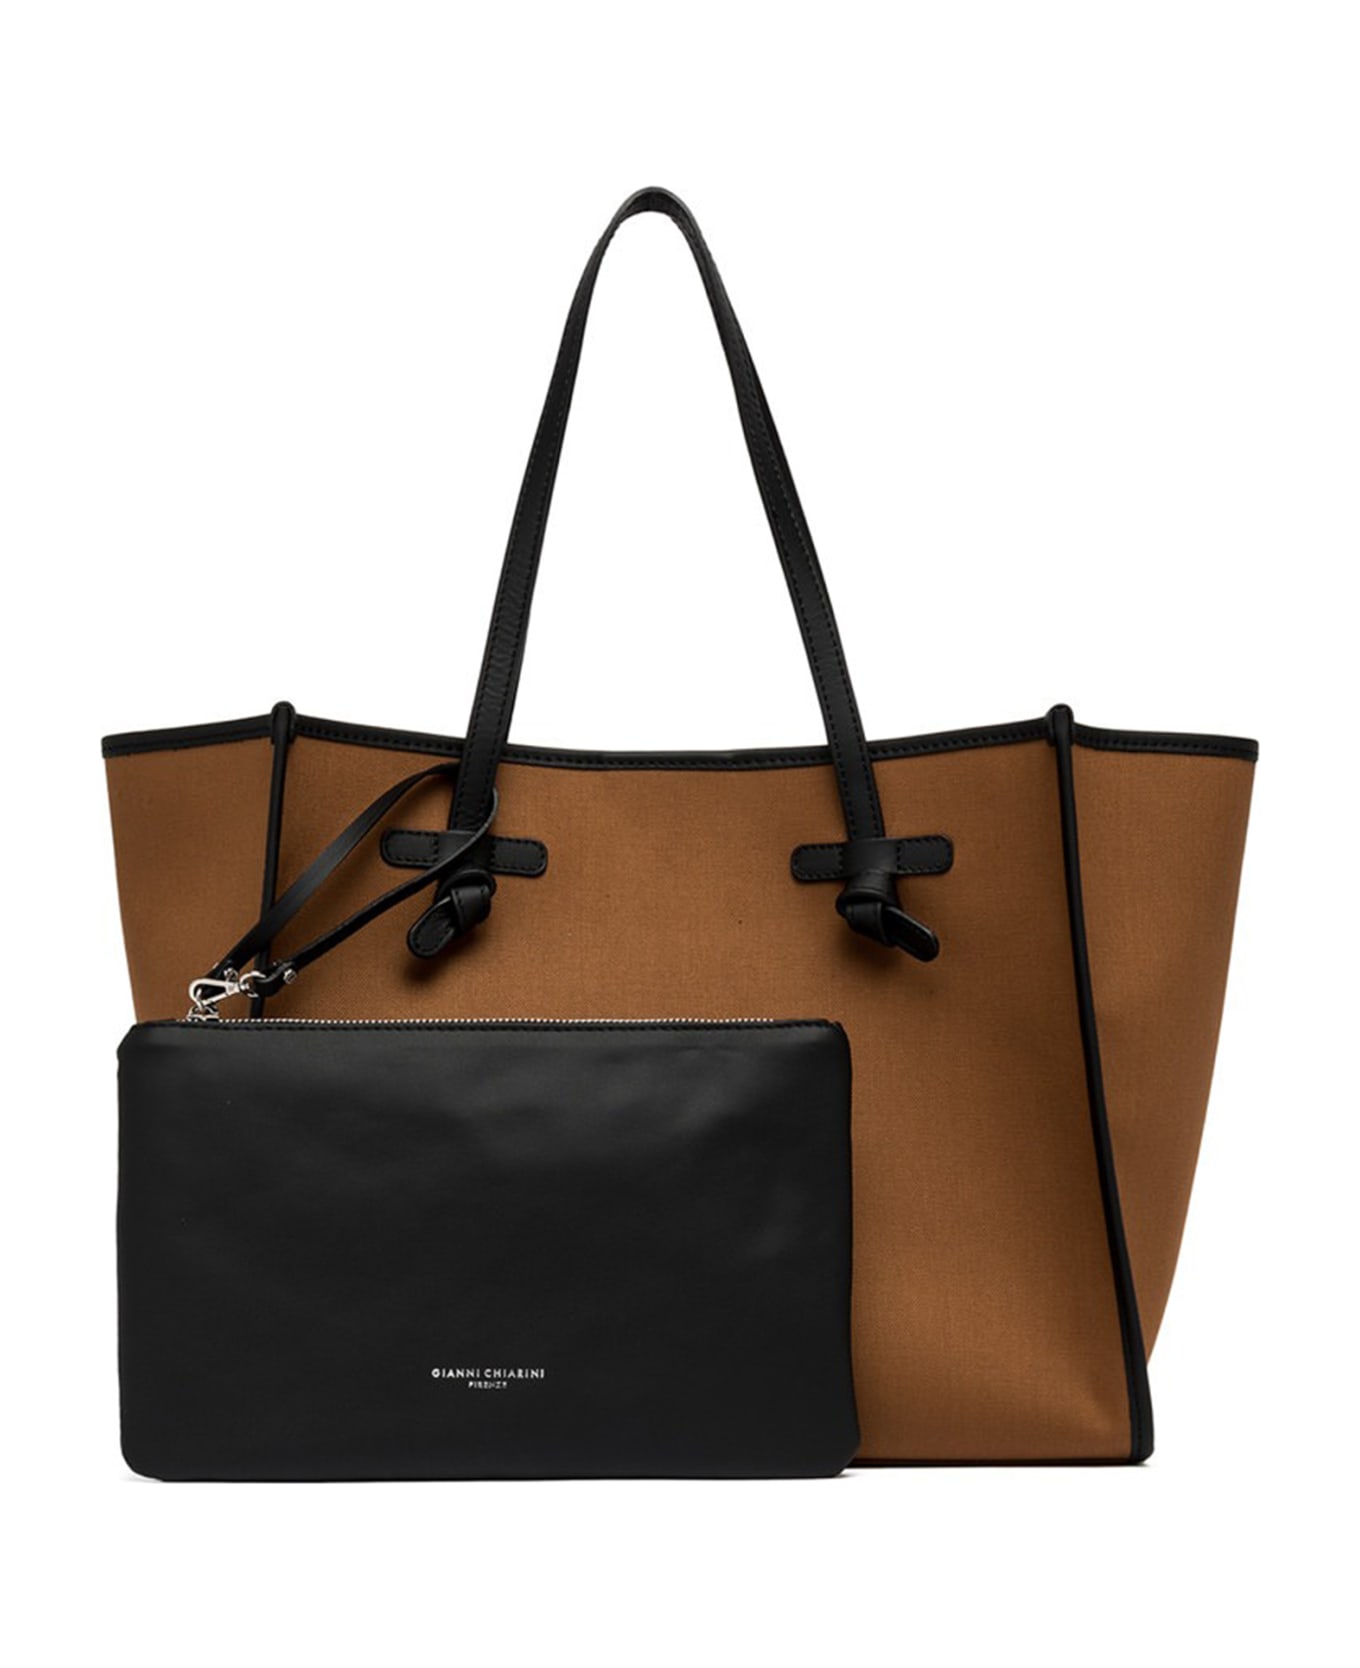 Gianni Chiarini Marcella Shopping Bag In Canvas And Leather Profiles - CUOIO-LILAC トートバッグ